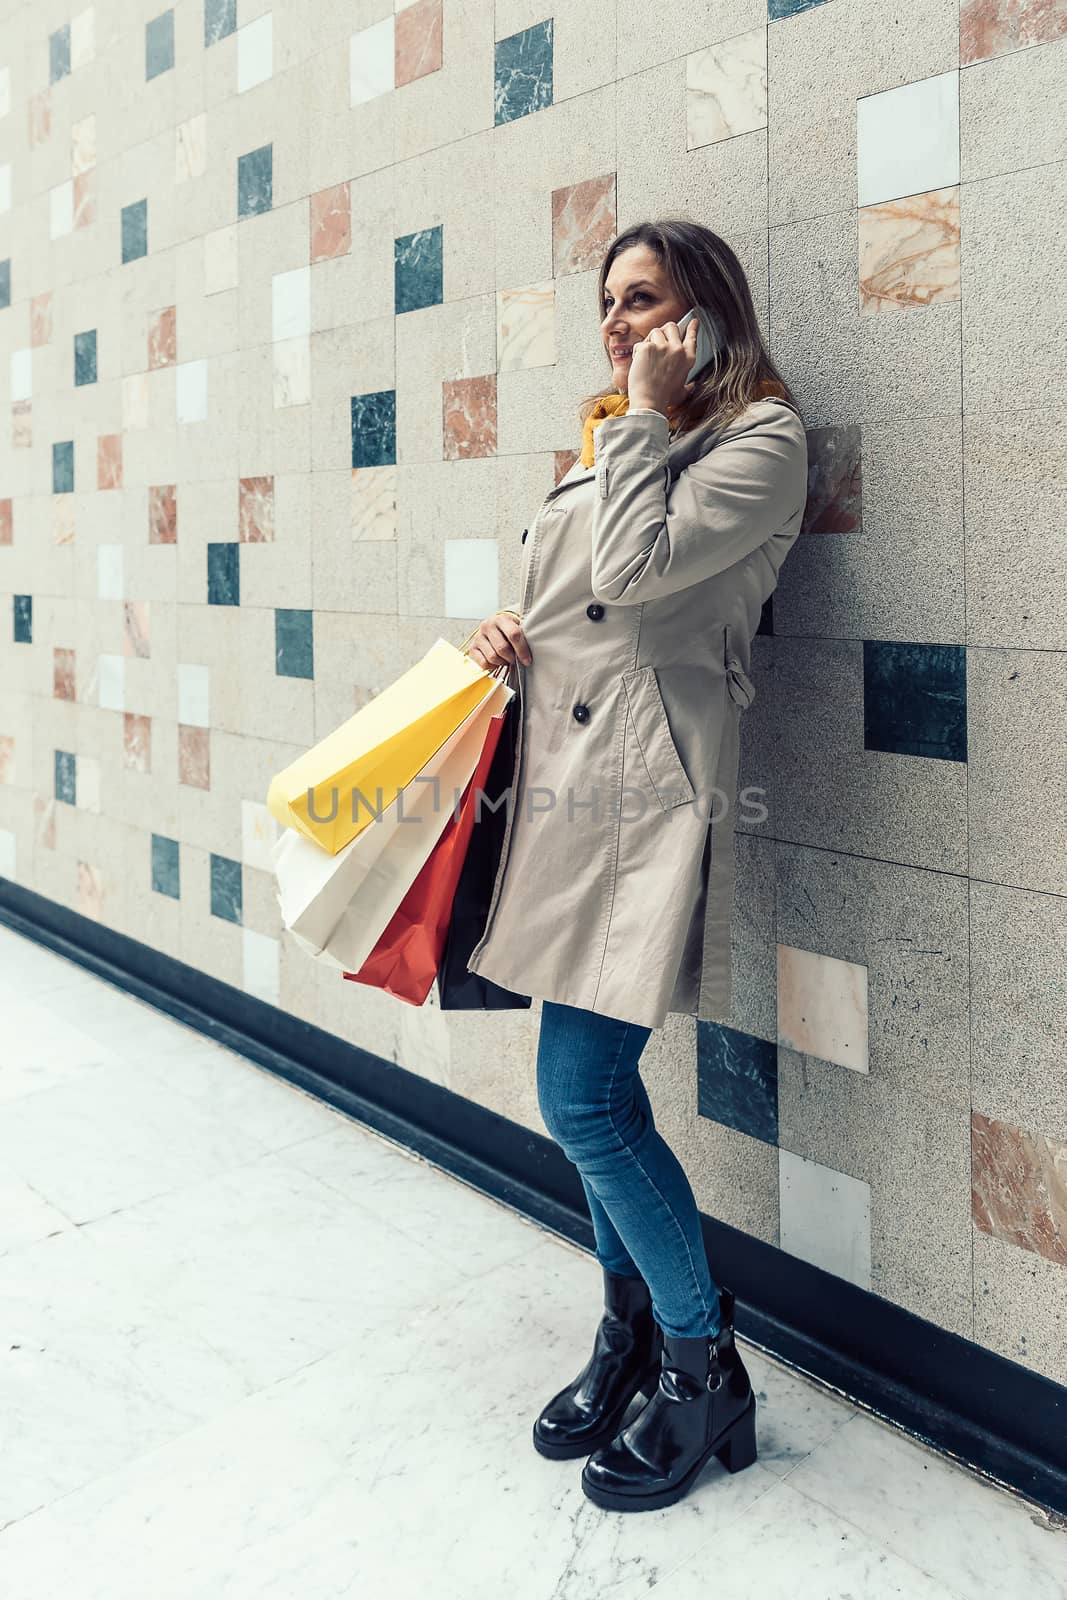 Adult woman talking on her mobile phone while holding shopping colorful bags. by JRPazos